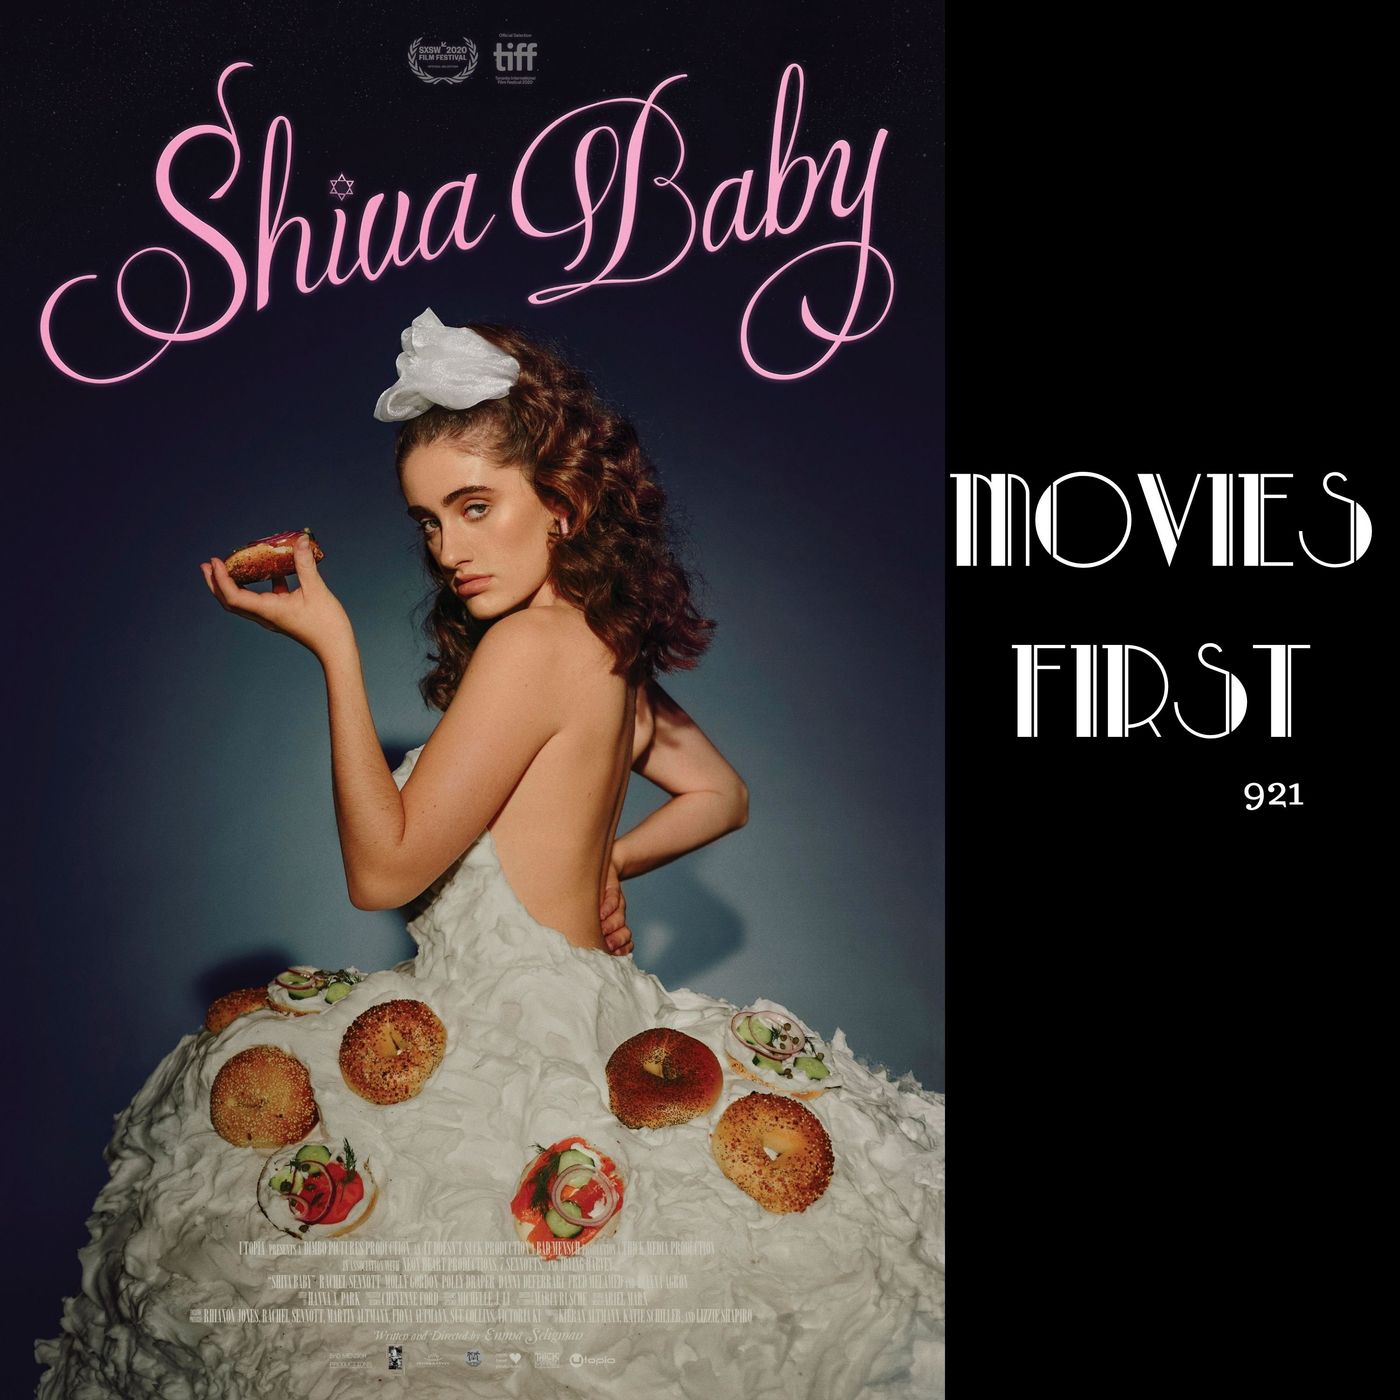 Shiva Baby (Comedy) (review)